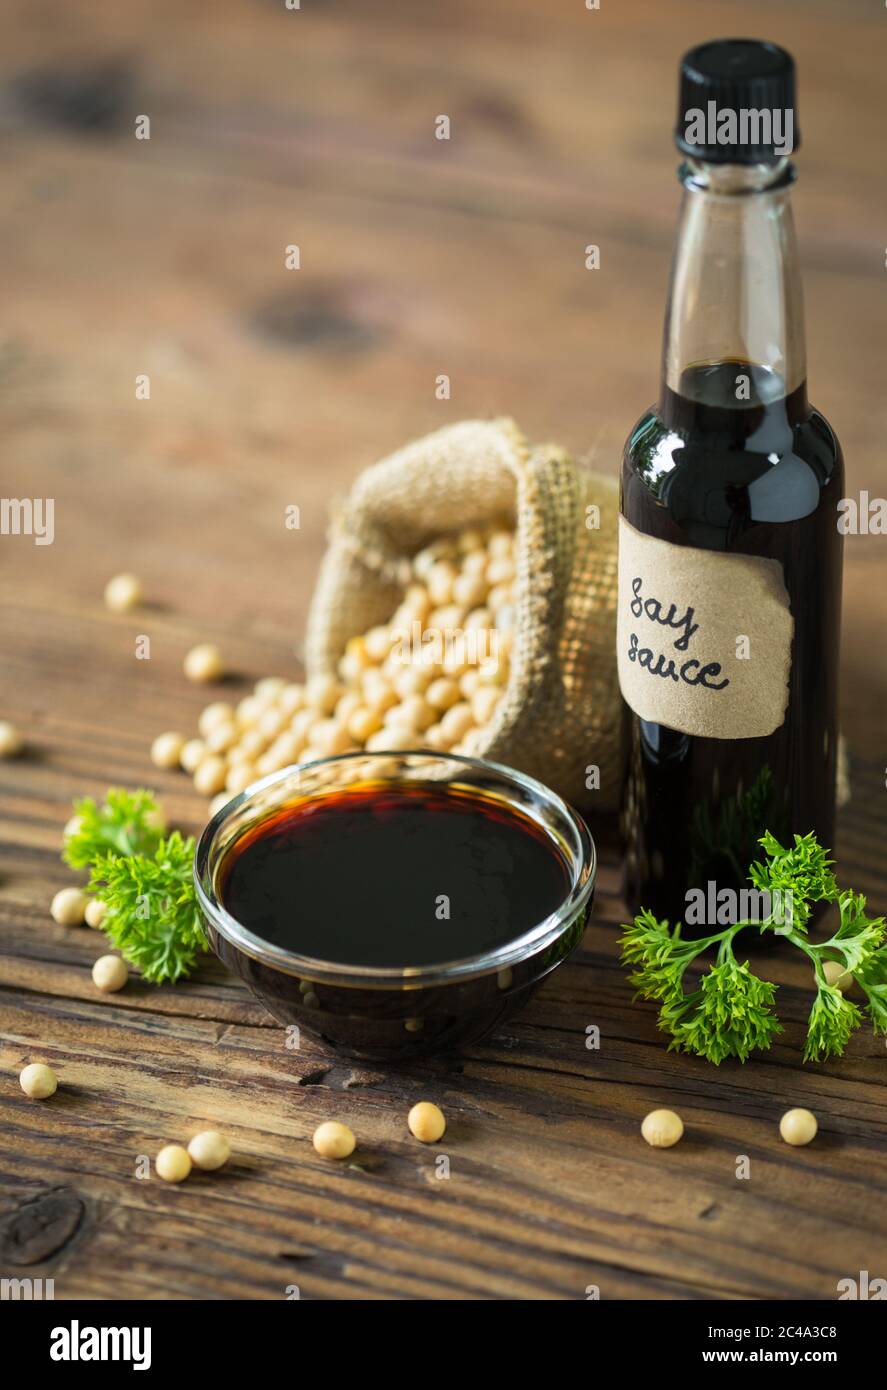 Download Soy Sauce Bottle High Resolution Stock Photography And Images Alamy Yellowimages Mockups